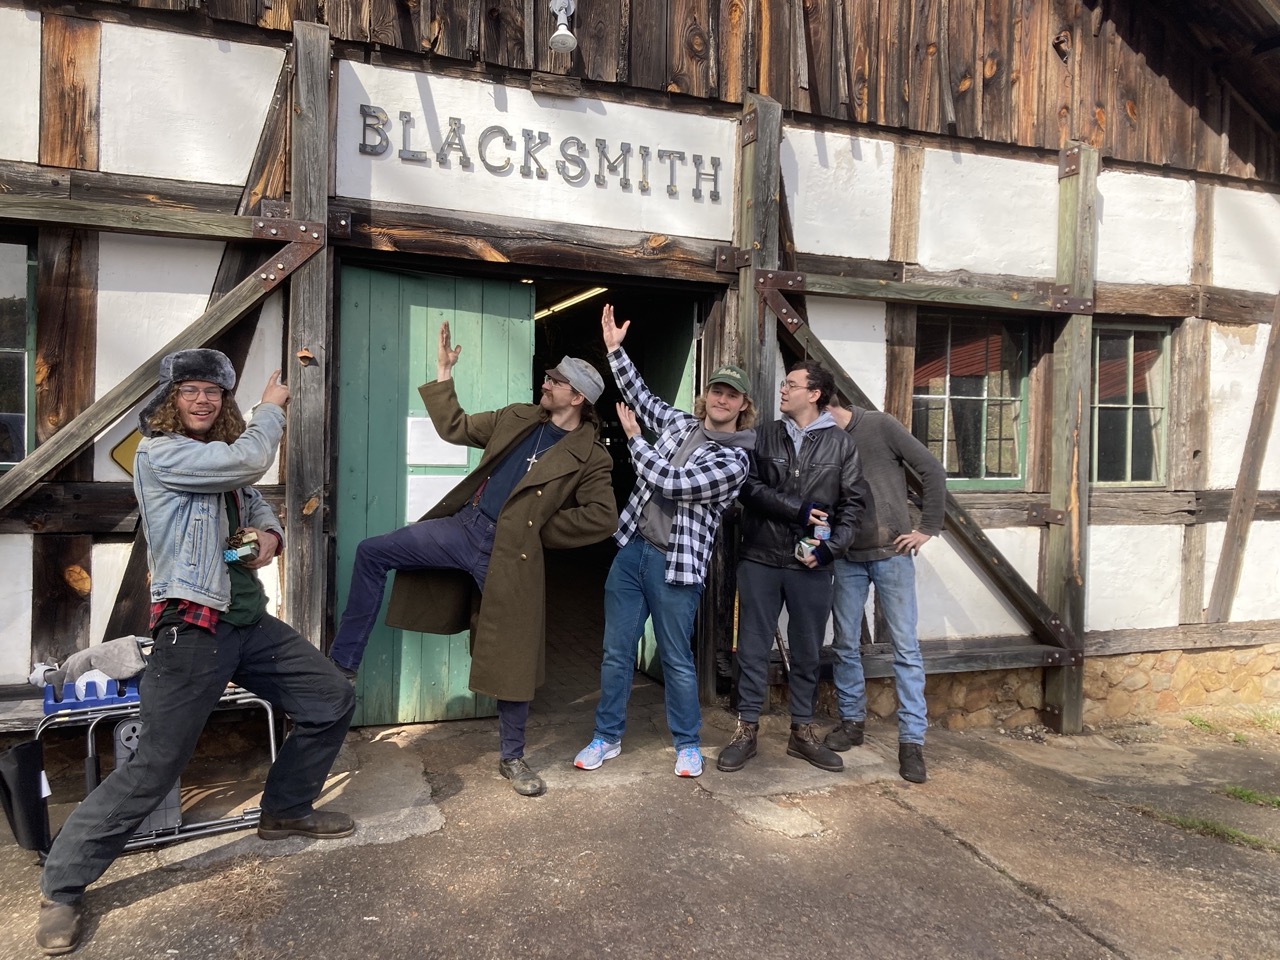 Group of 5 young individuals pointing in unison to a blacksmith sign.